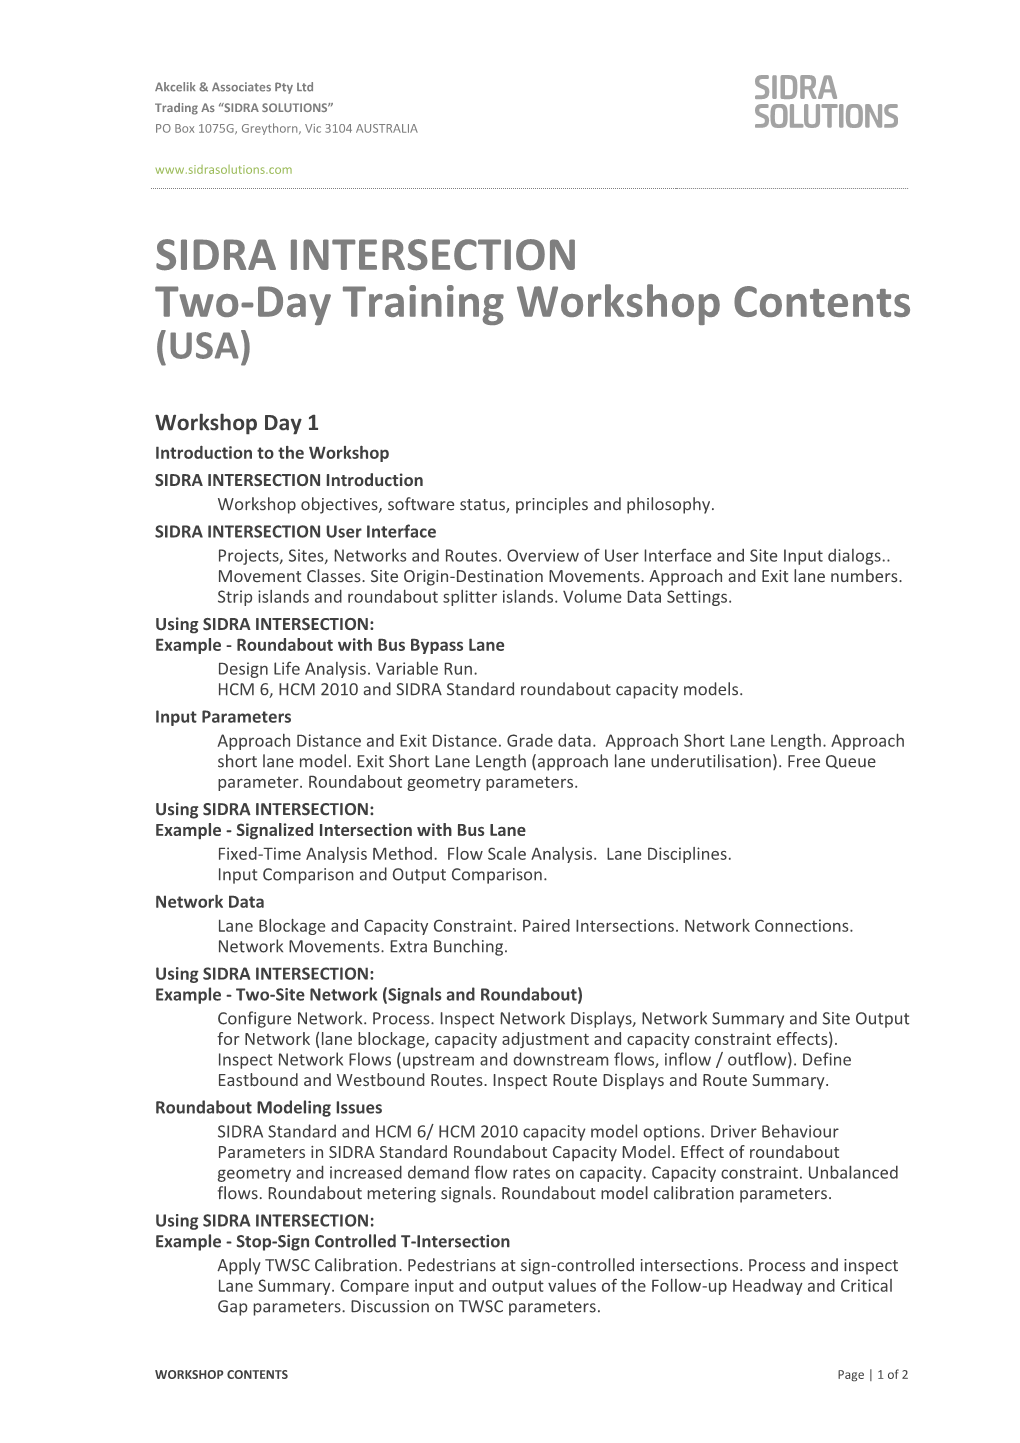 SIDRA INTERSECTION Two-Day Training Workshop Contents (USA)